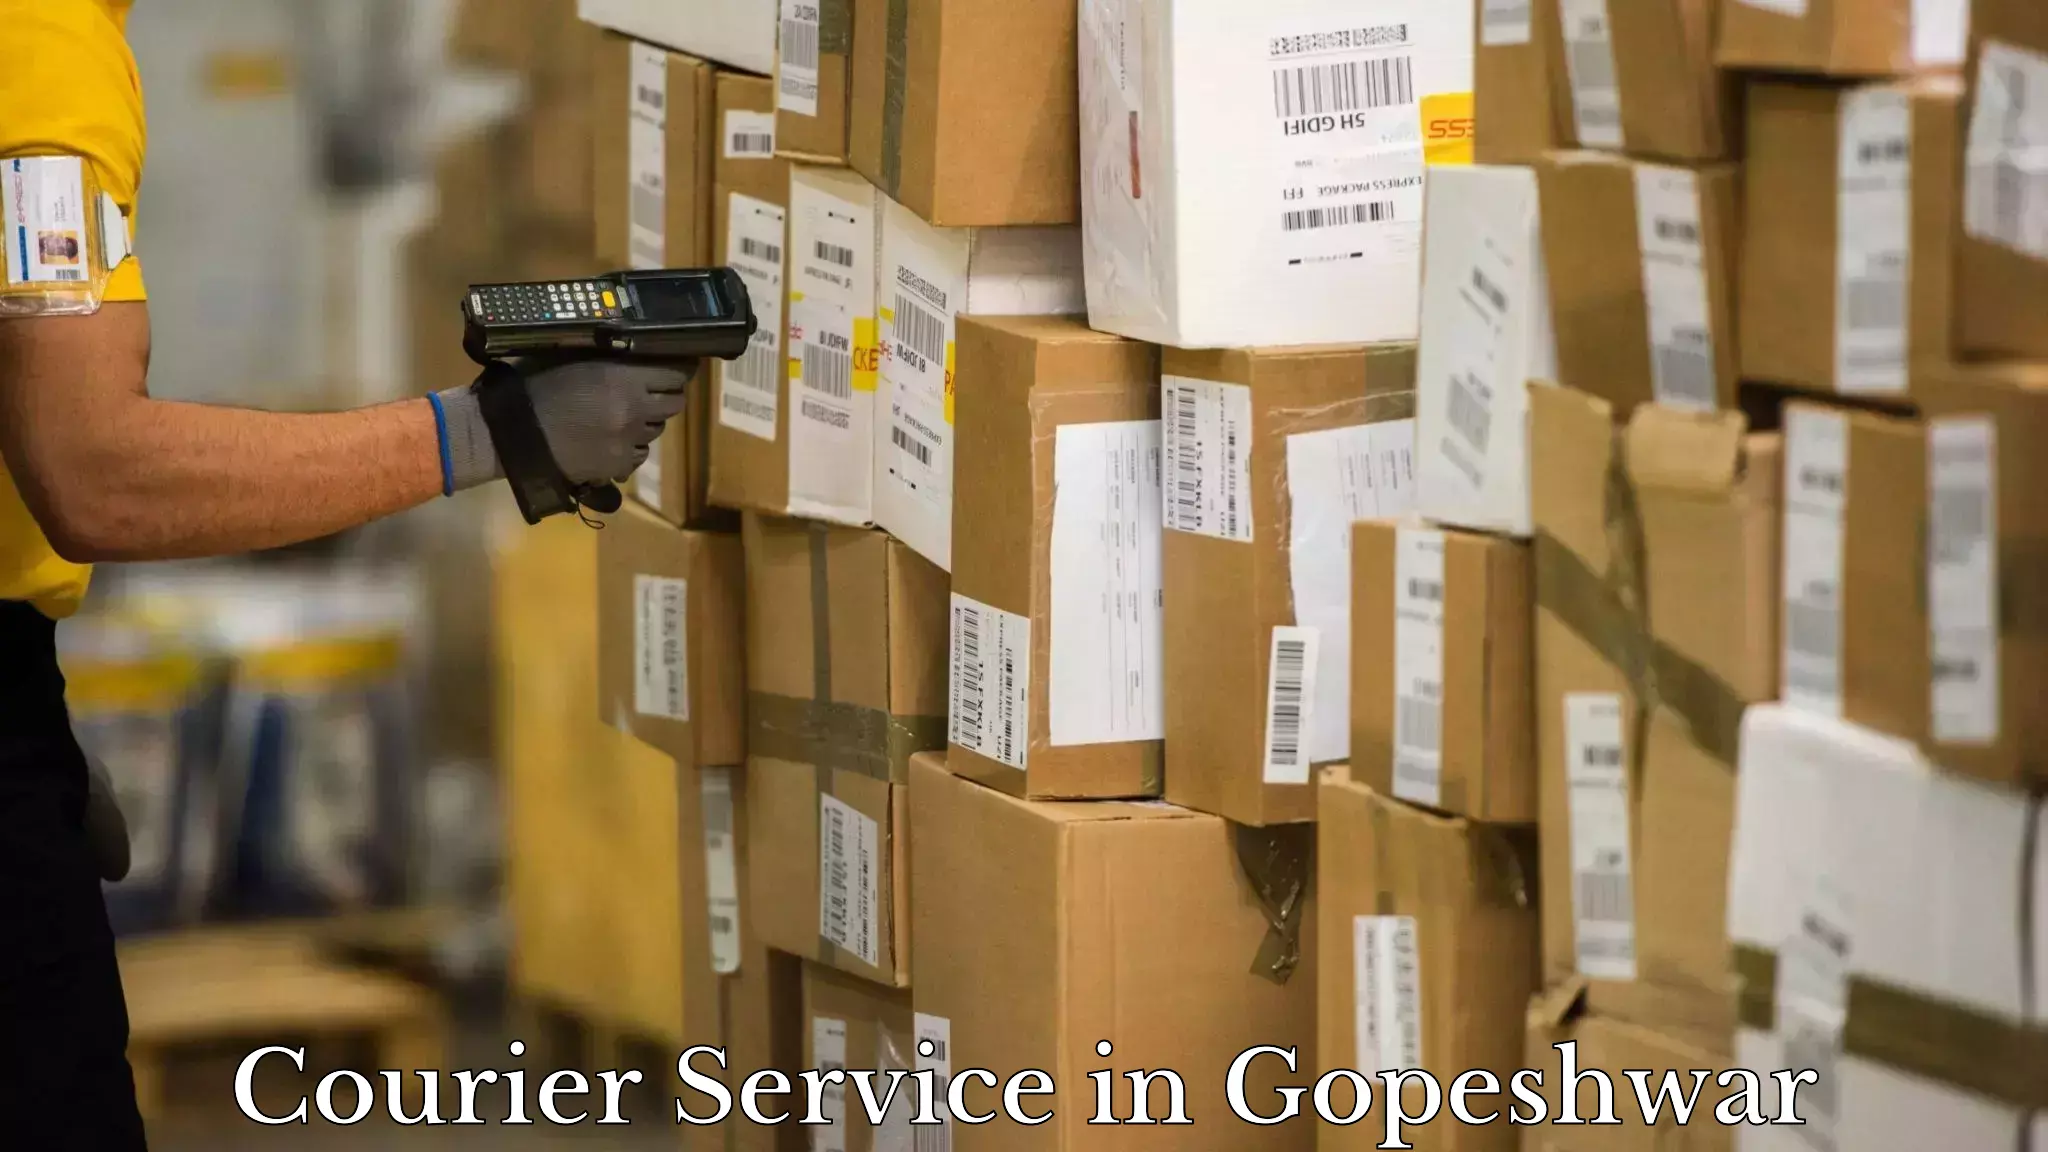 Parcel delivery automation in Gopeshwar